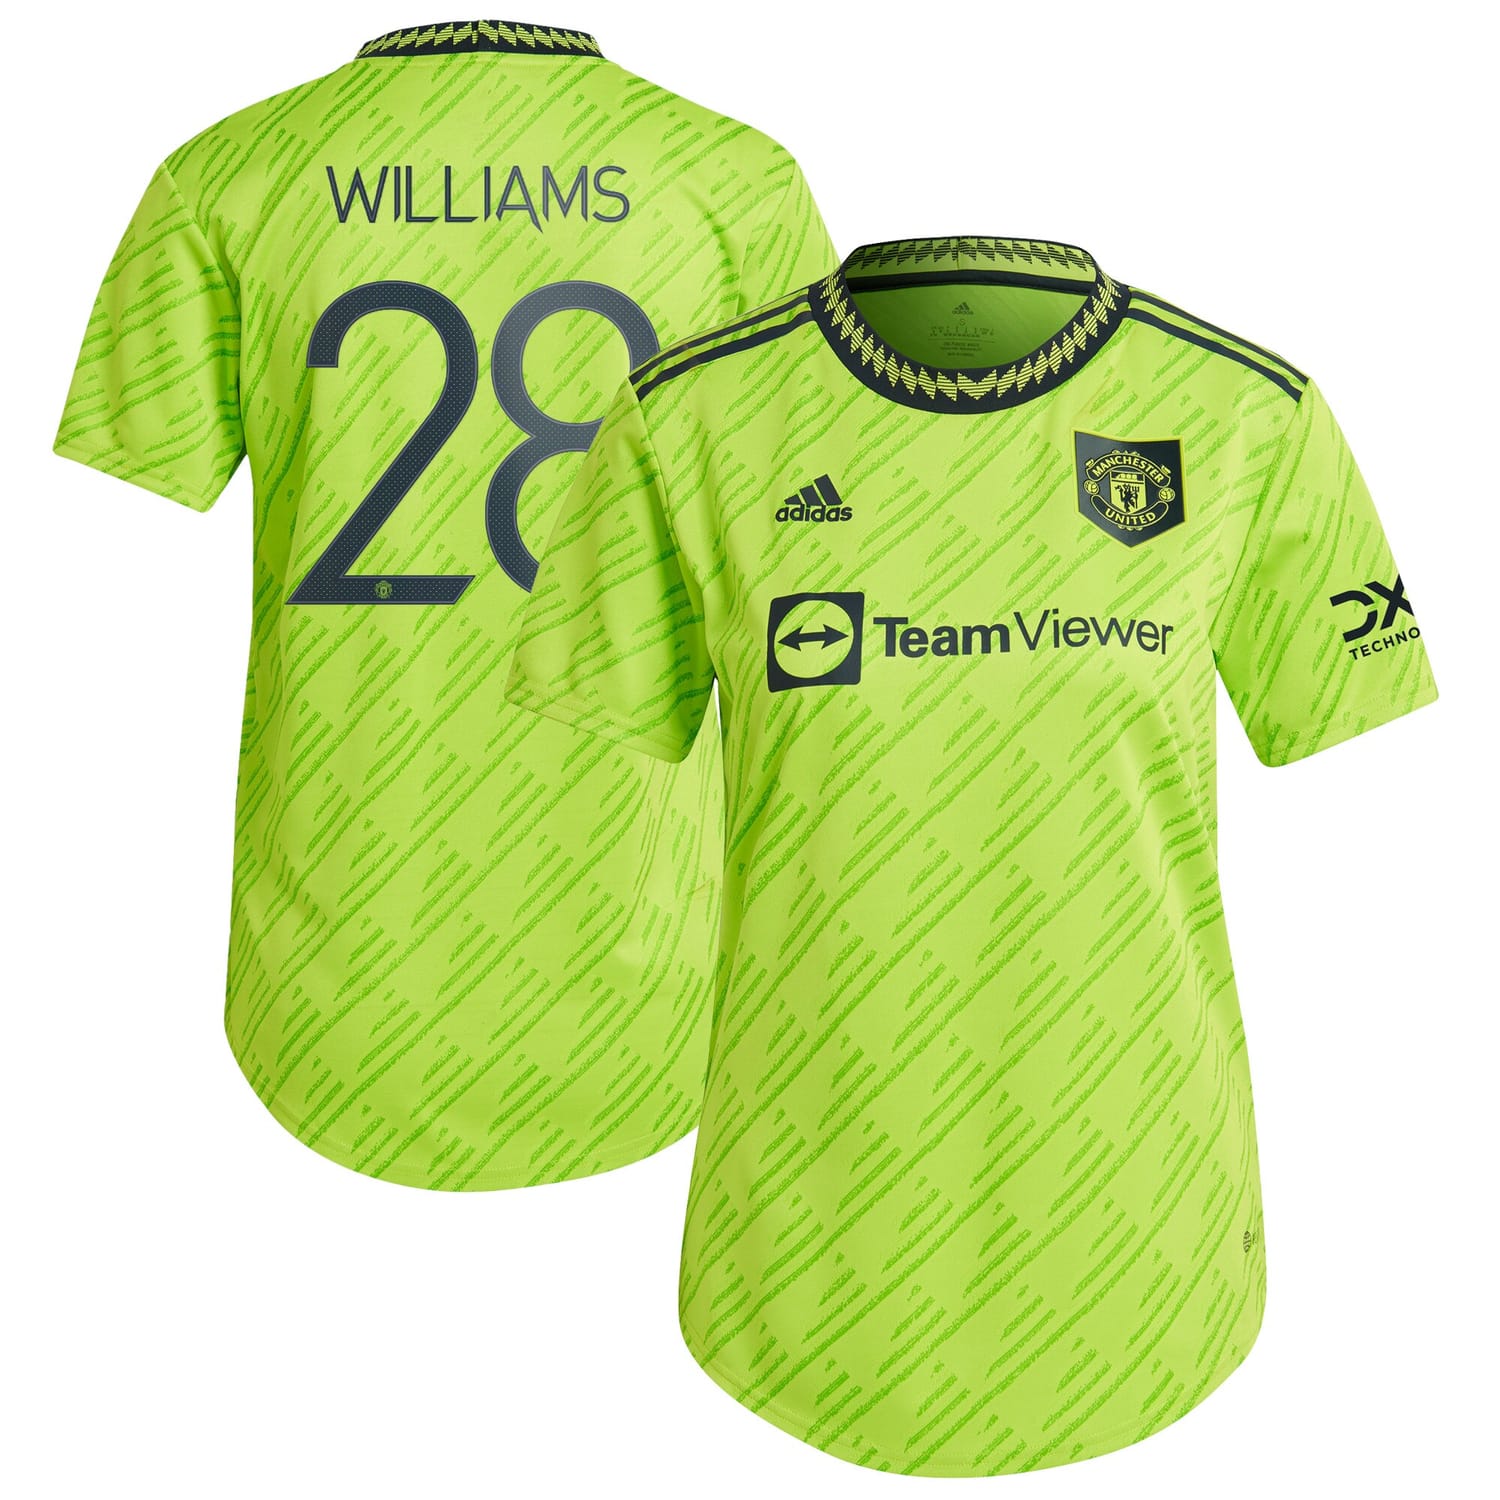 Premier League Manchester United Third Cup Authentic Jersey Shirt 2022-23 player Rachel Williams 28 printing for Women